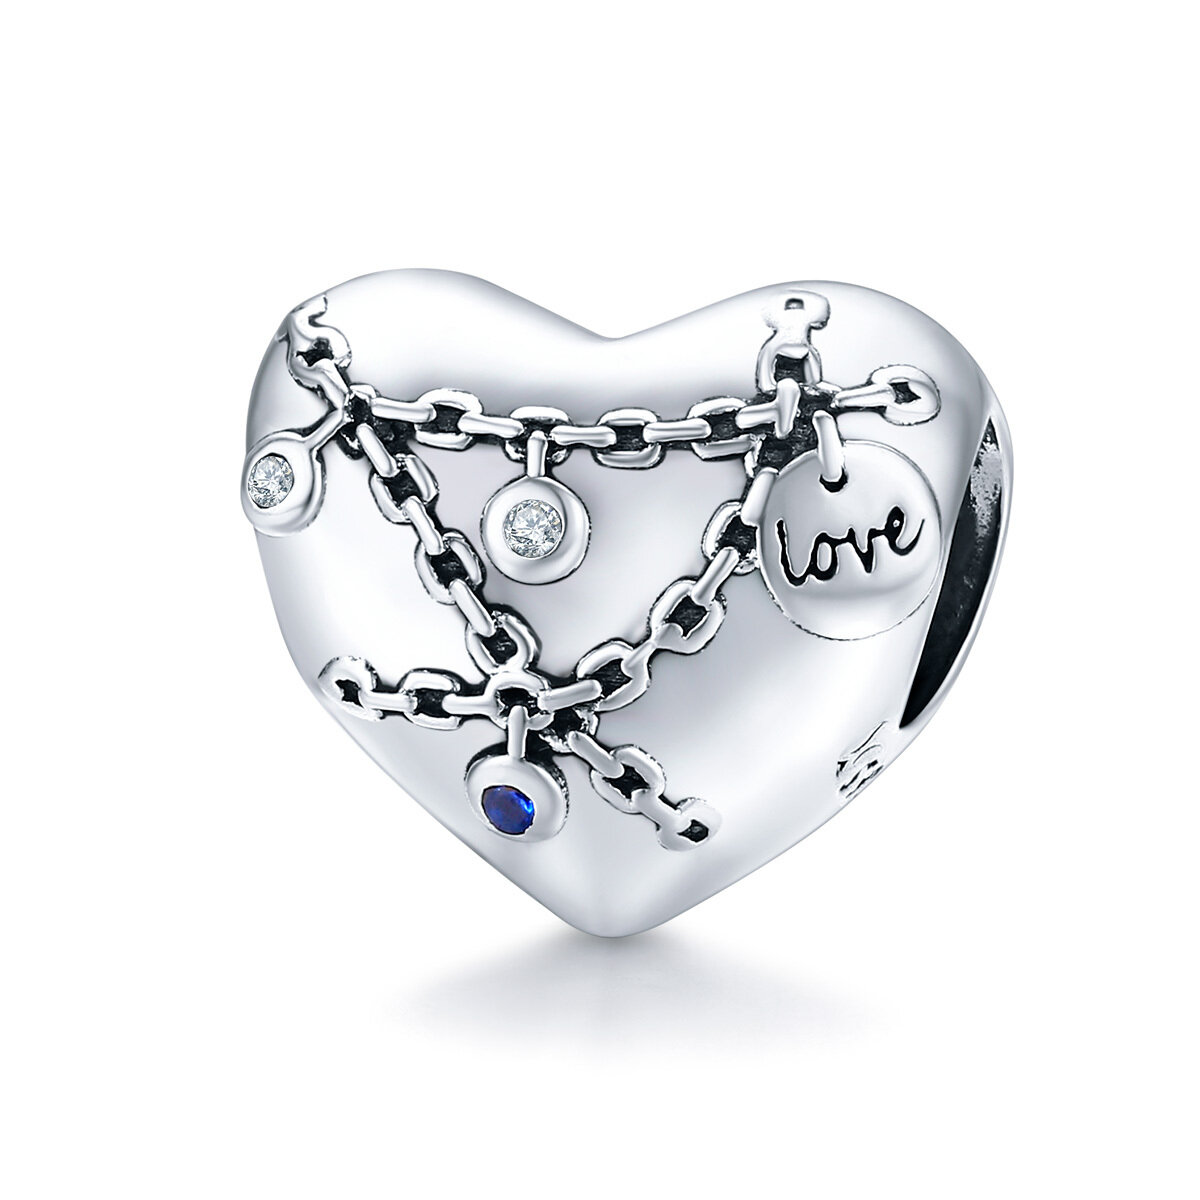 GemKing SCC1538 Heart with Lock S925 Sterling Silver Charm